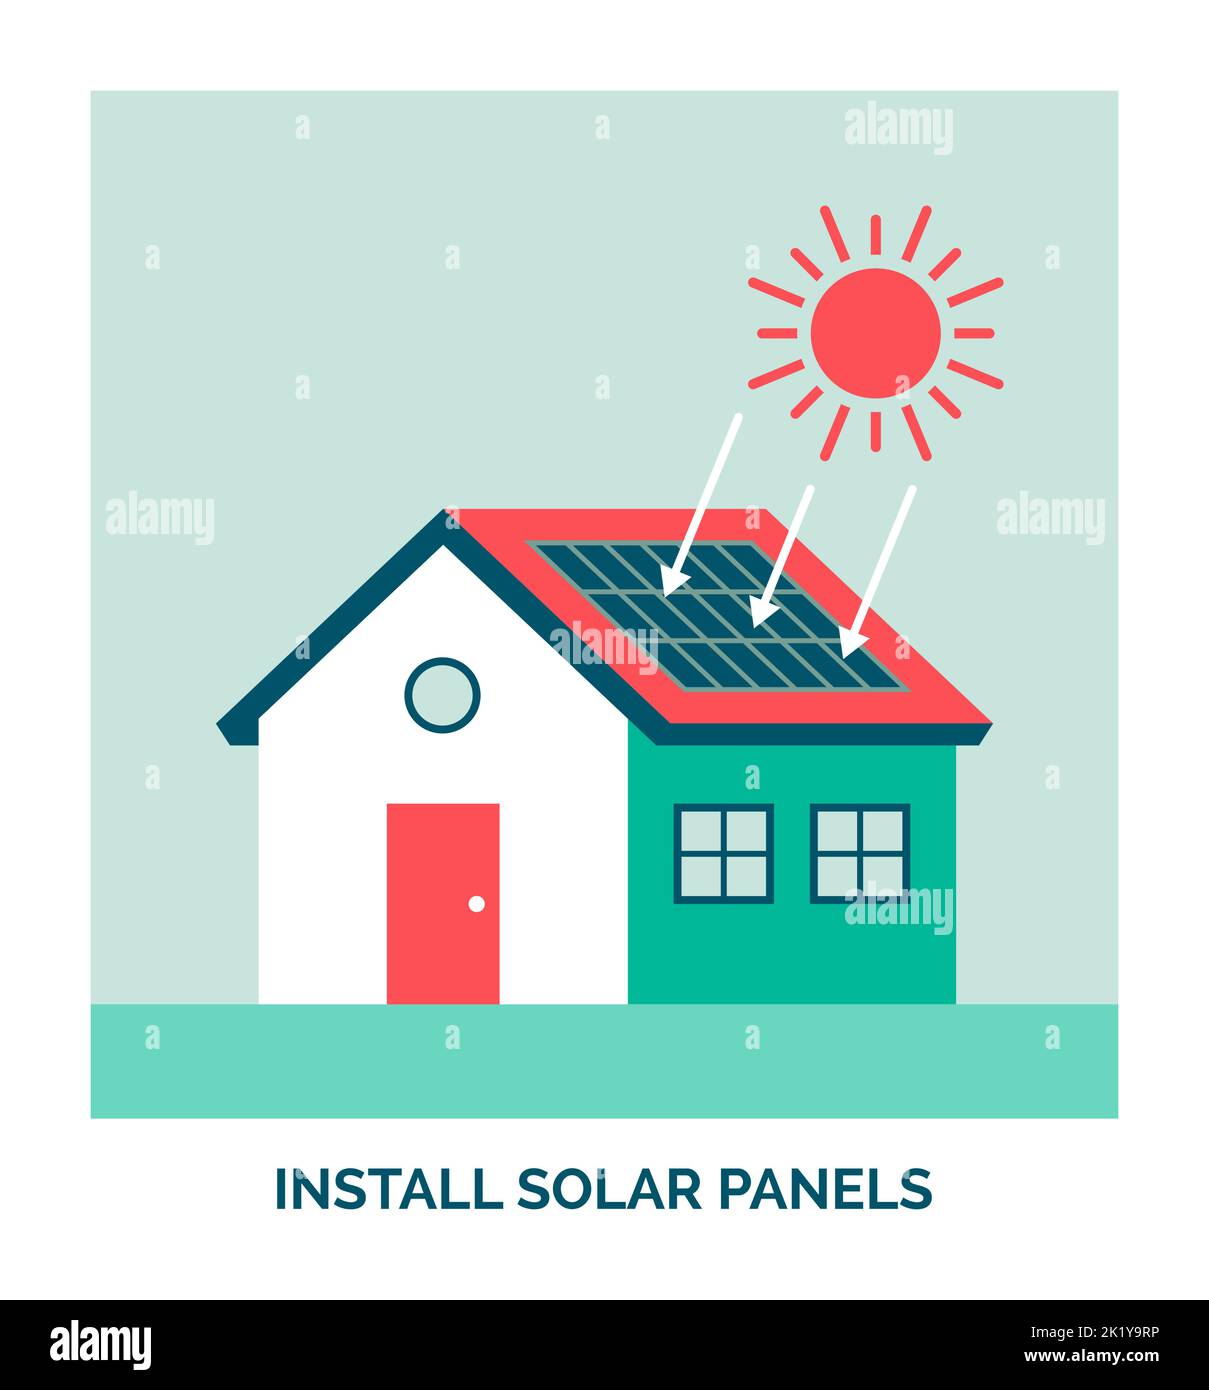 Eco-friendly home: install photovoltaic solar panels Stock Vector